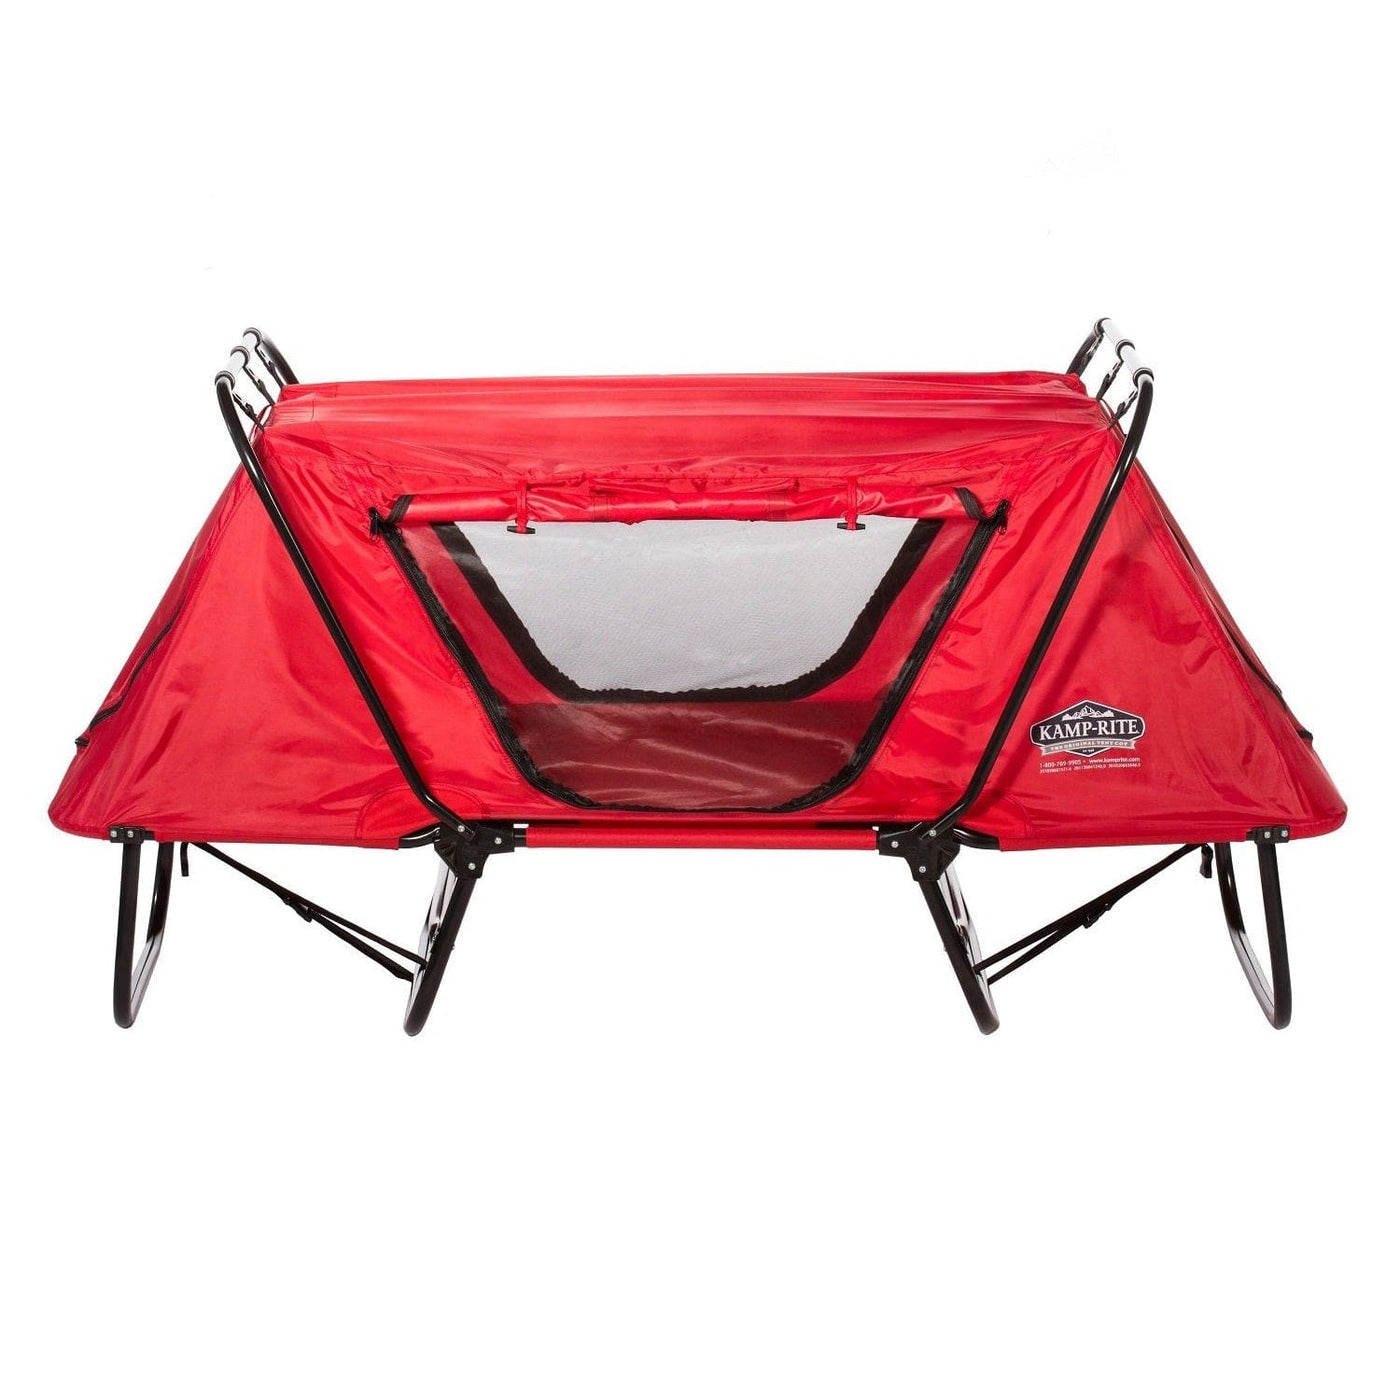 Kamp-Rite Kamp-Rite Kid Cot with Rain Fly - Red Camping And Outdoor